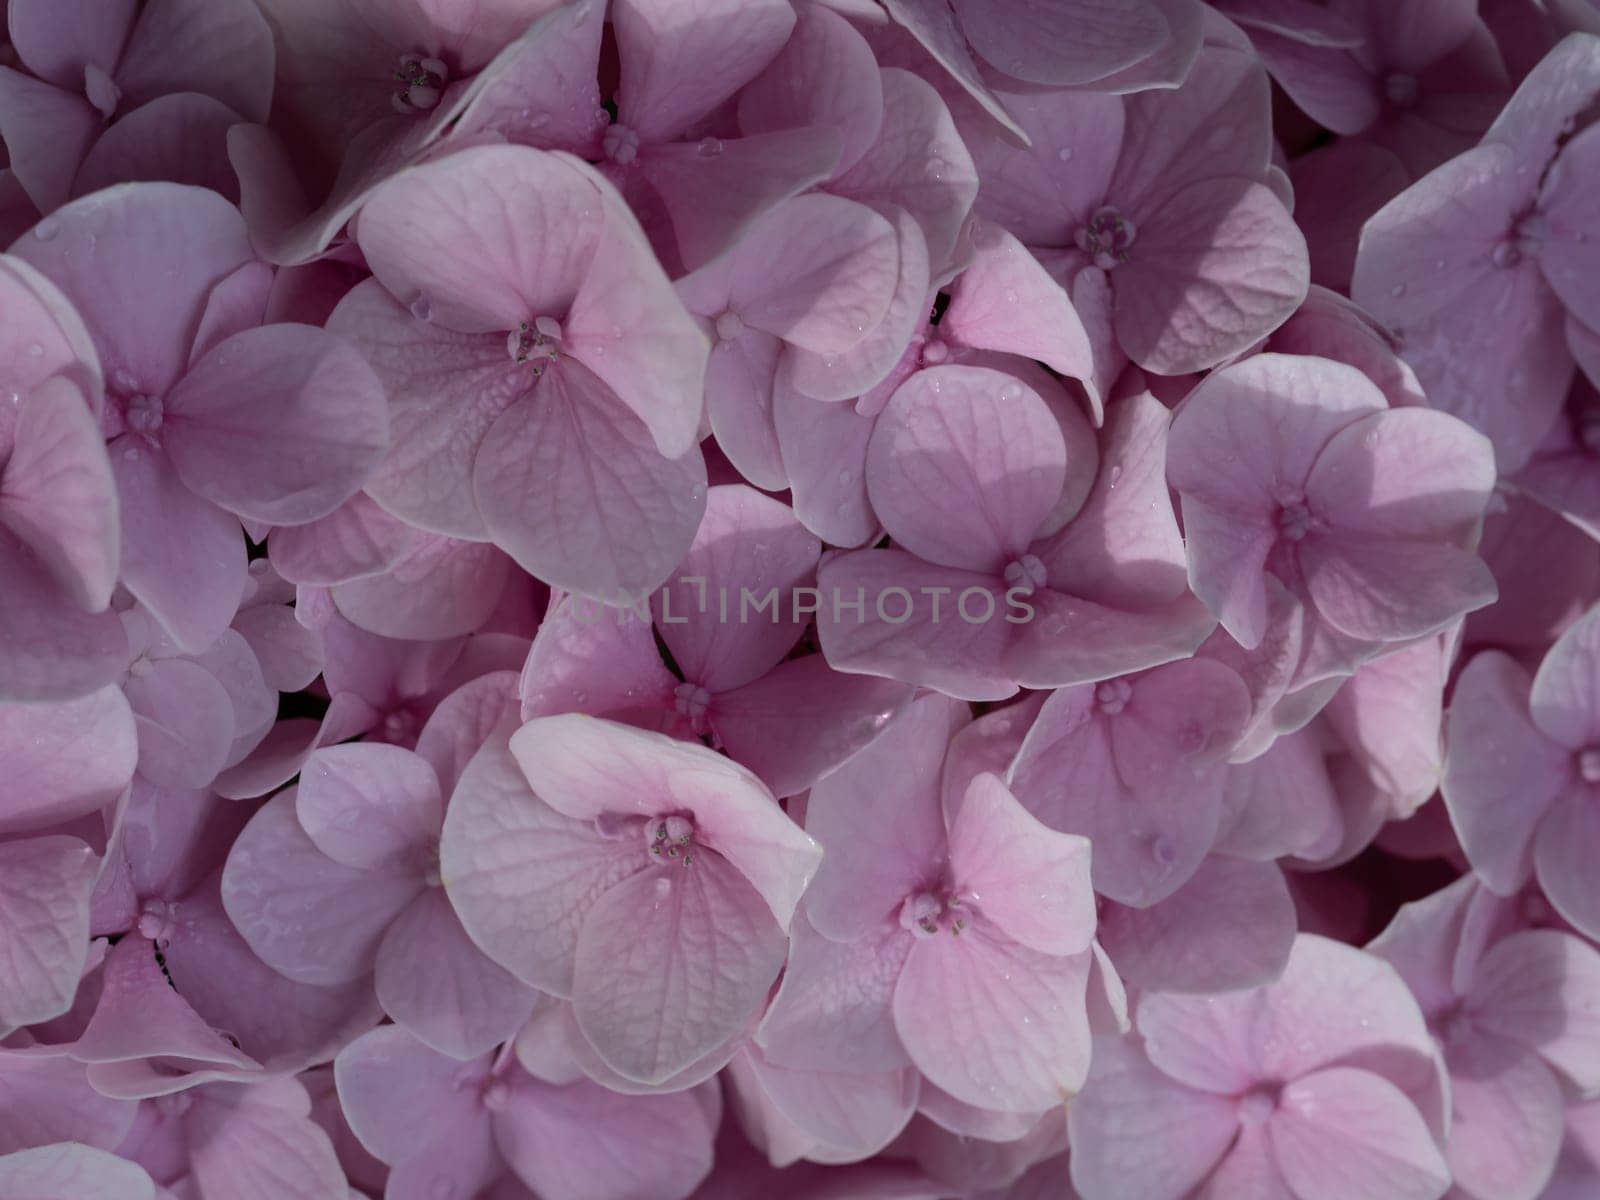 Close-up photo of a bouquet of hydrangeas flowers by Satakorn